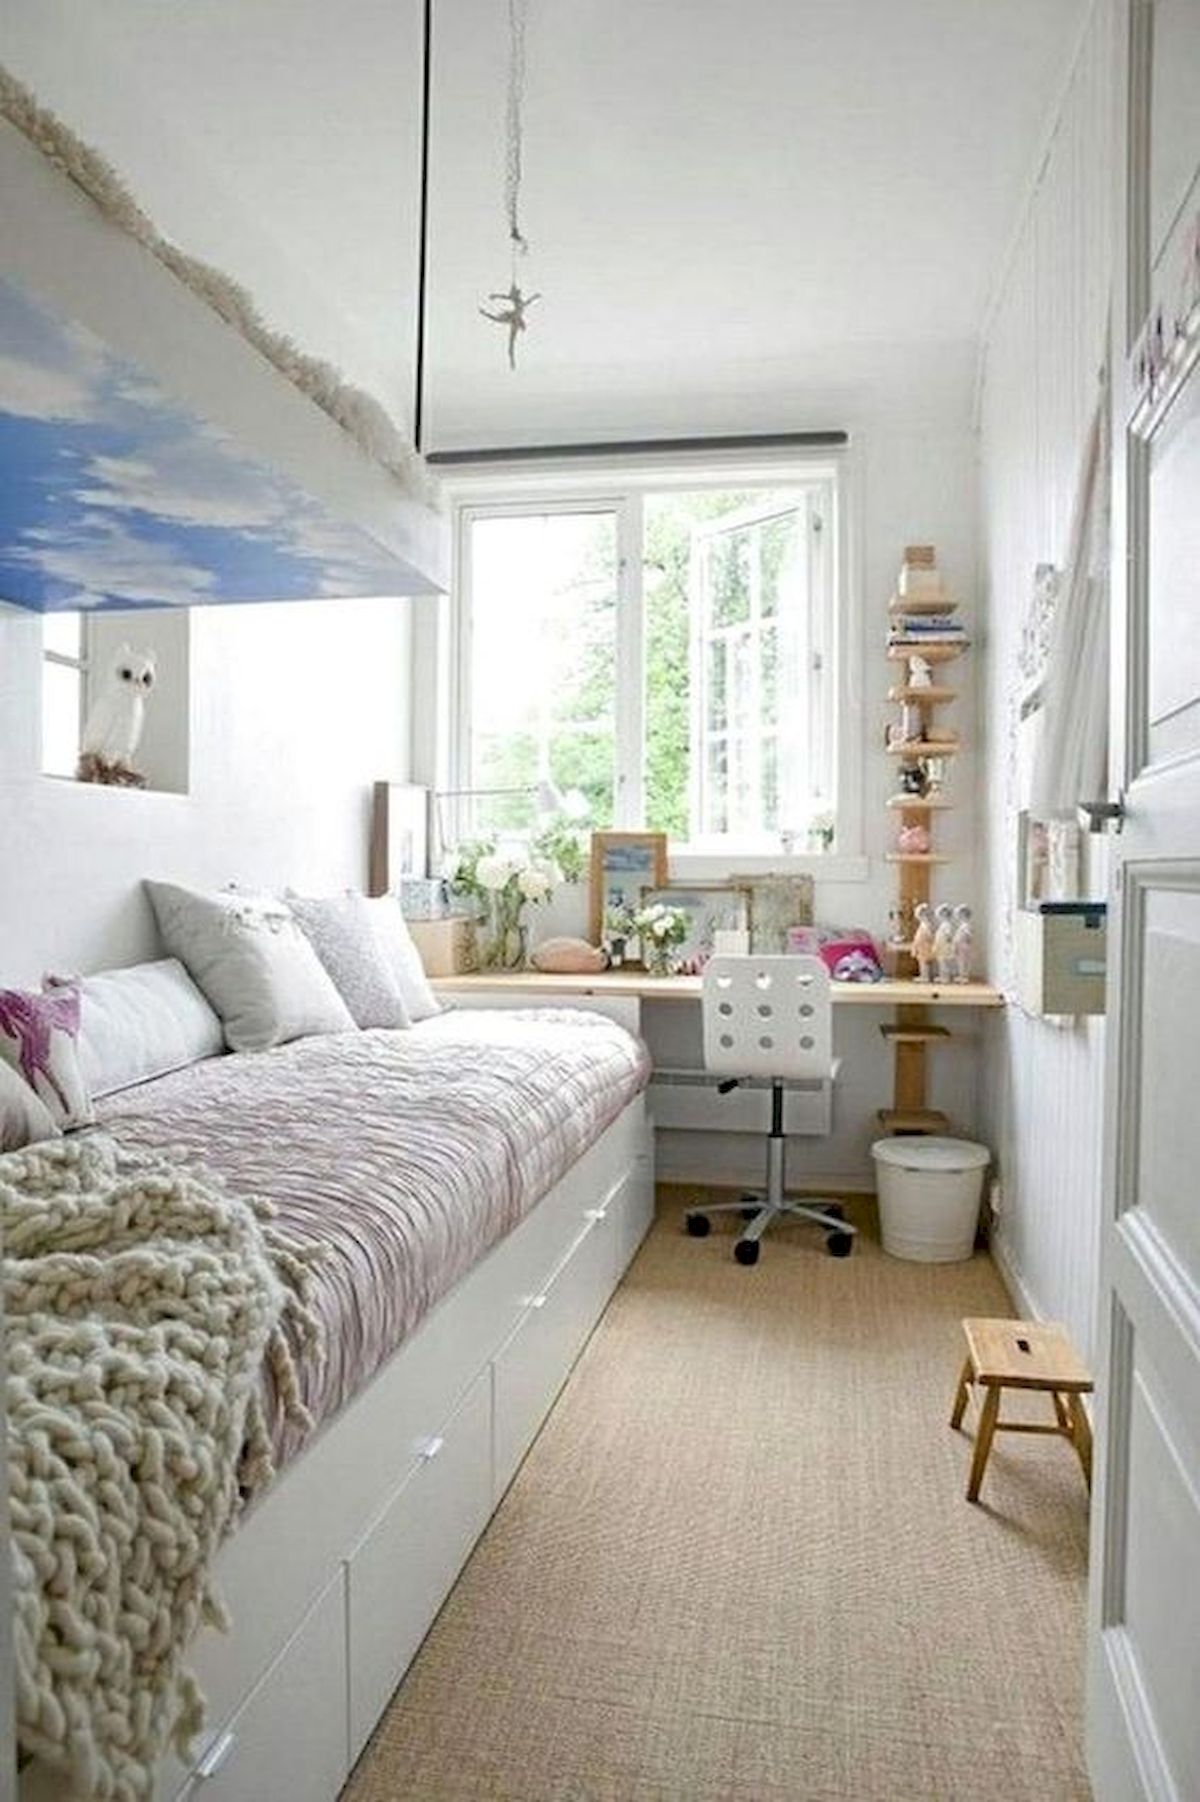 40 Cute Small Bedroom Design And Decor Ideas For Teenage Girl (30)